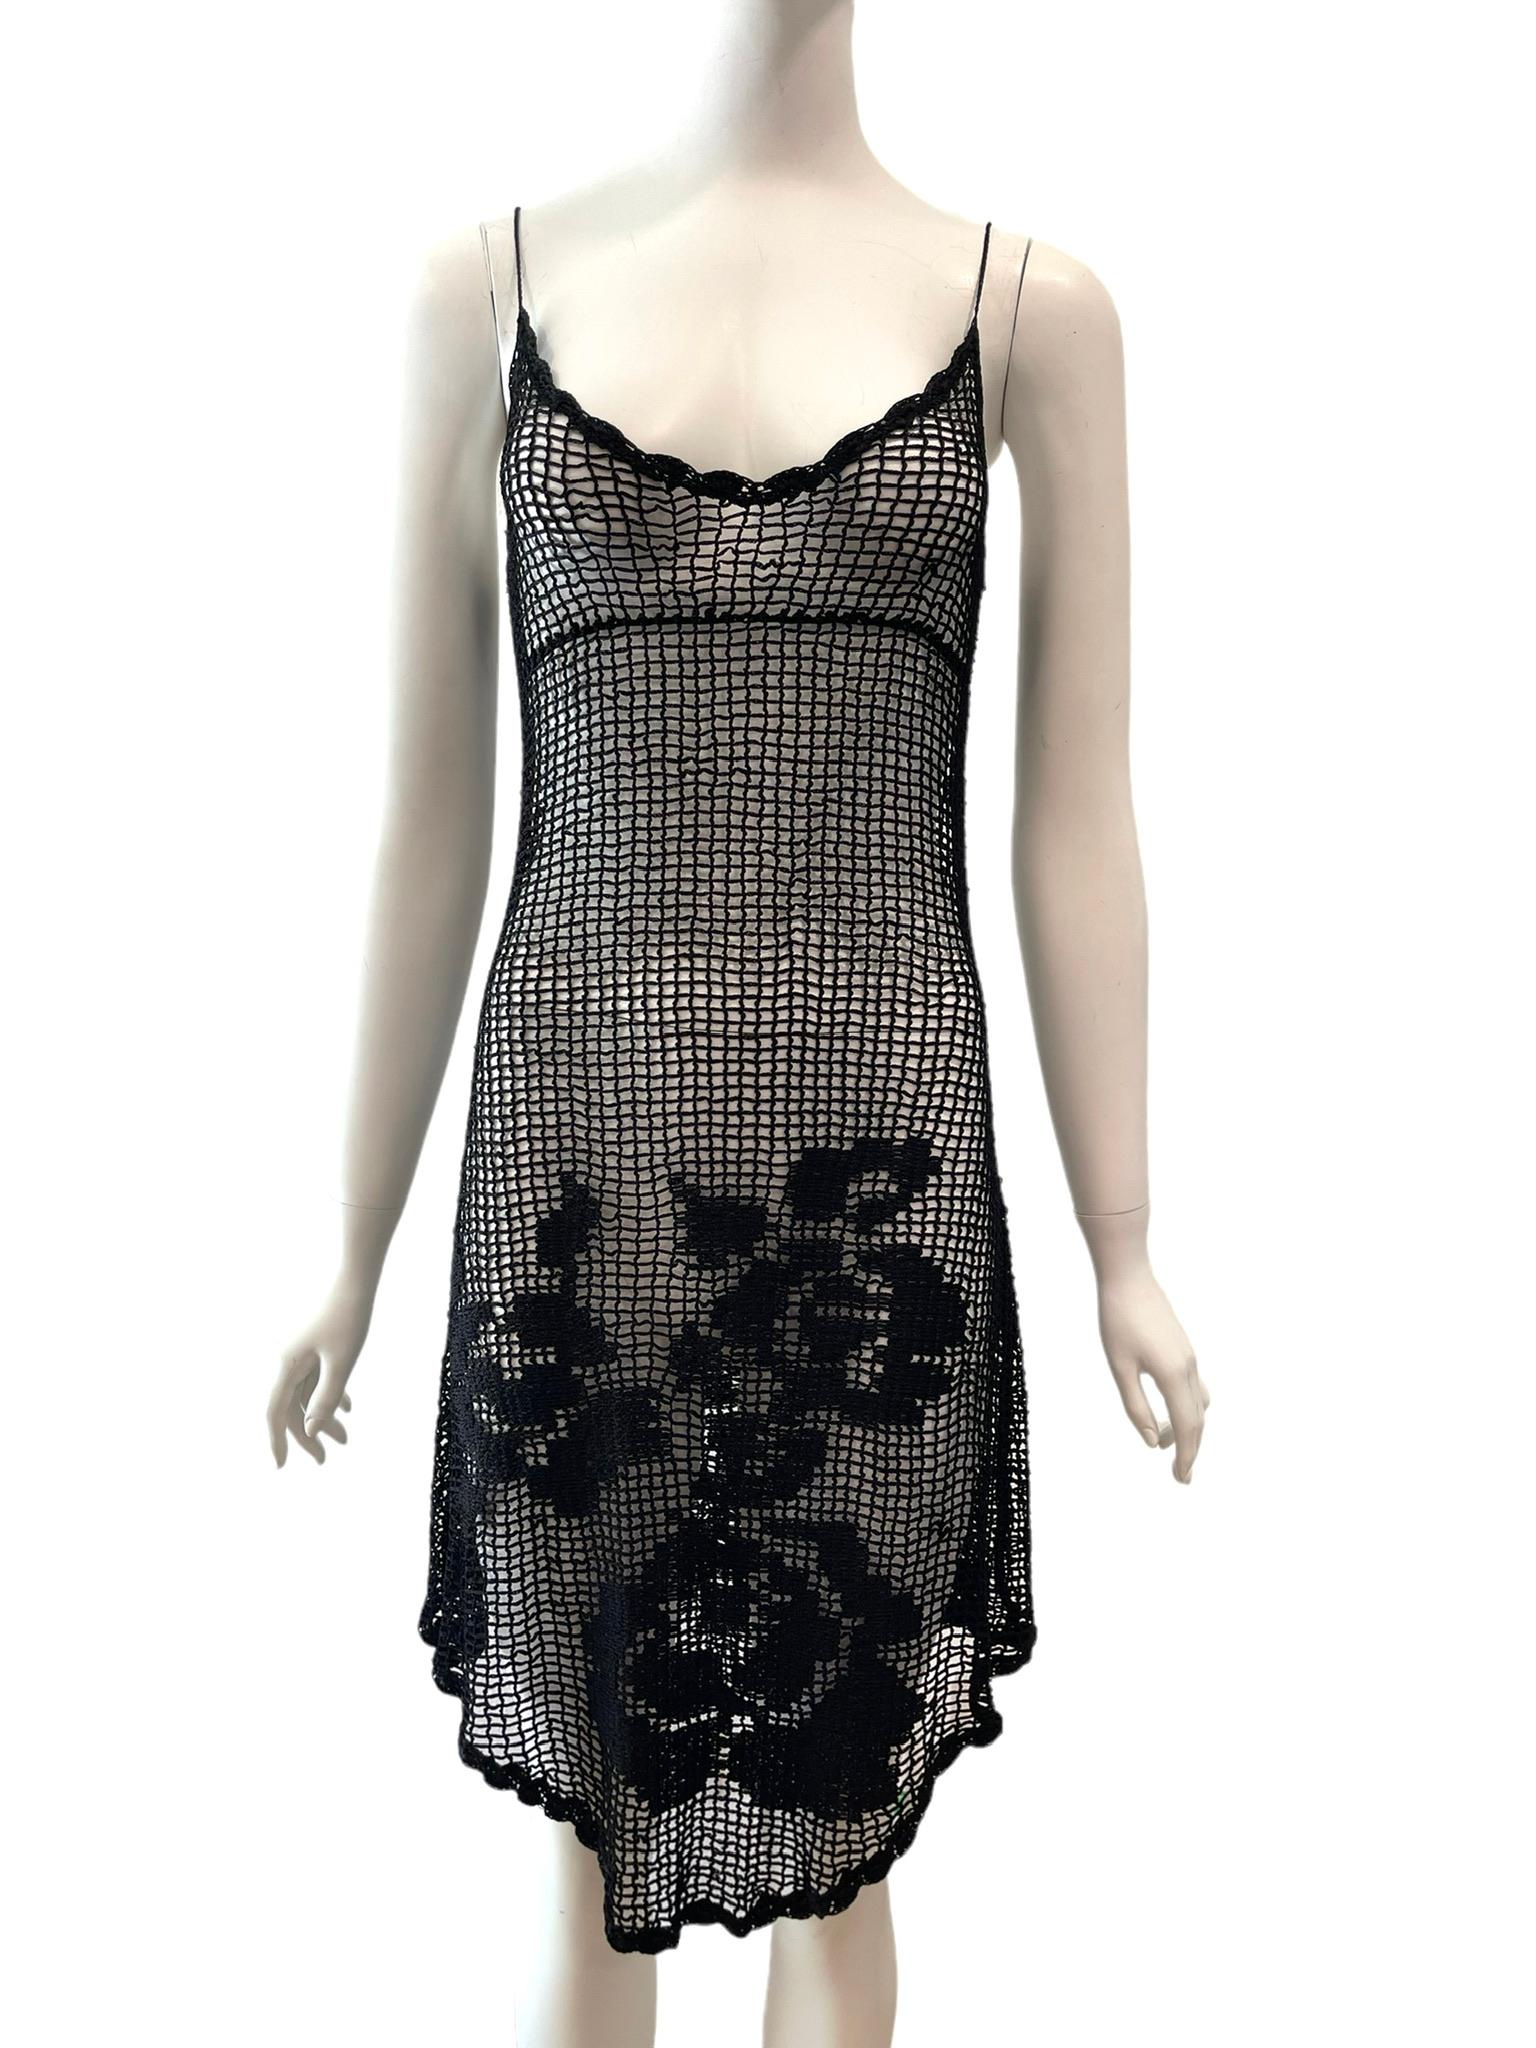 F/W 1997 Dolce & Gabbana Runway Sheer Black Knit Dress
Condition: Very good
Viscose fabric
Made in Italy
Bust: 32